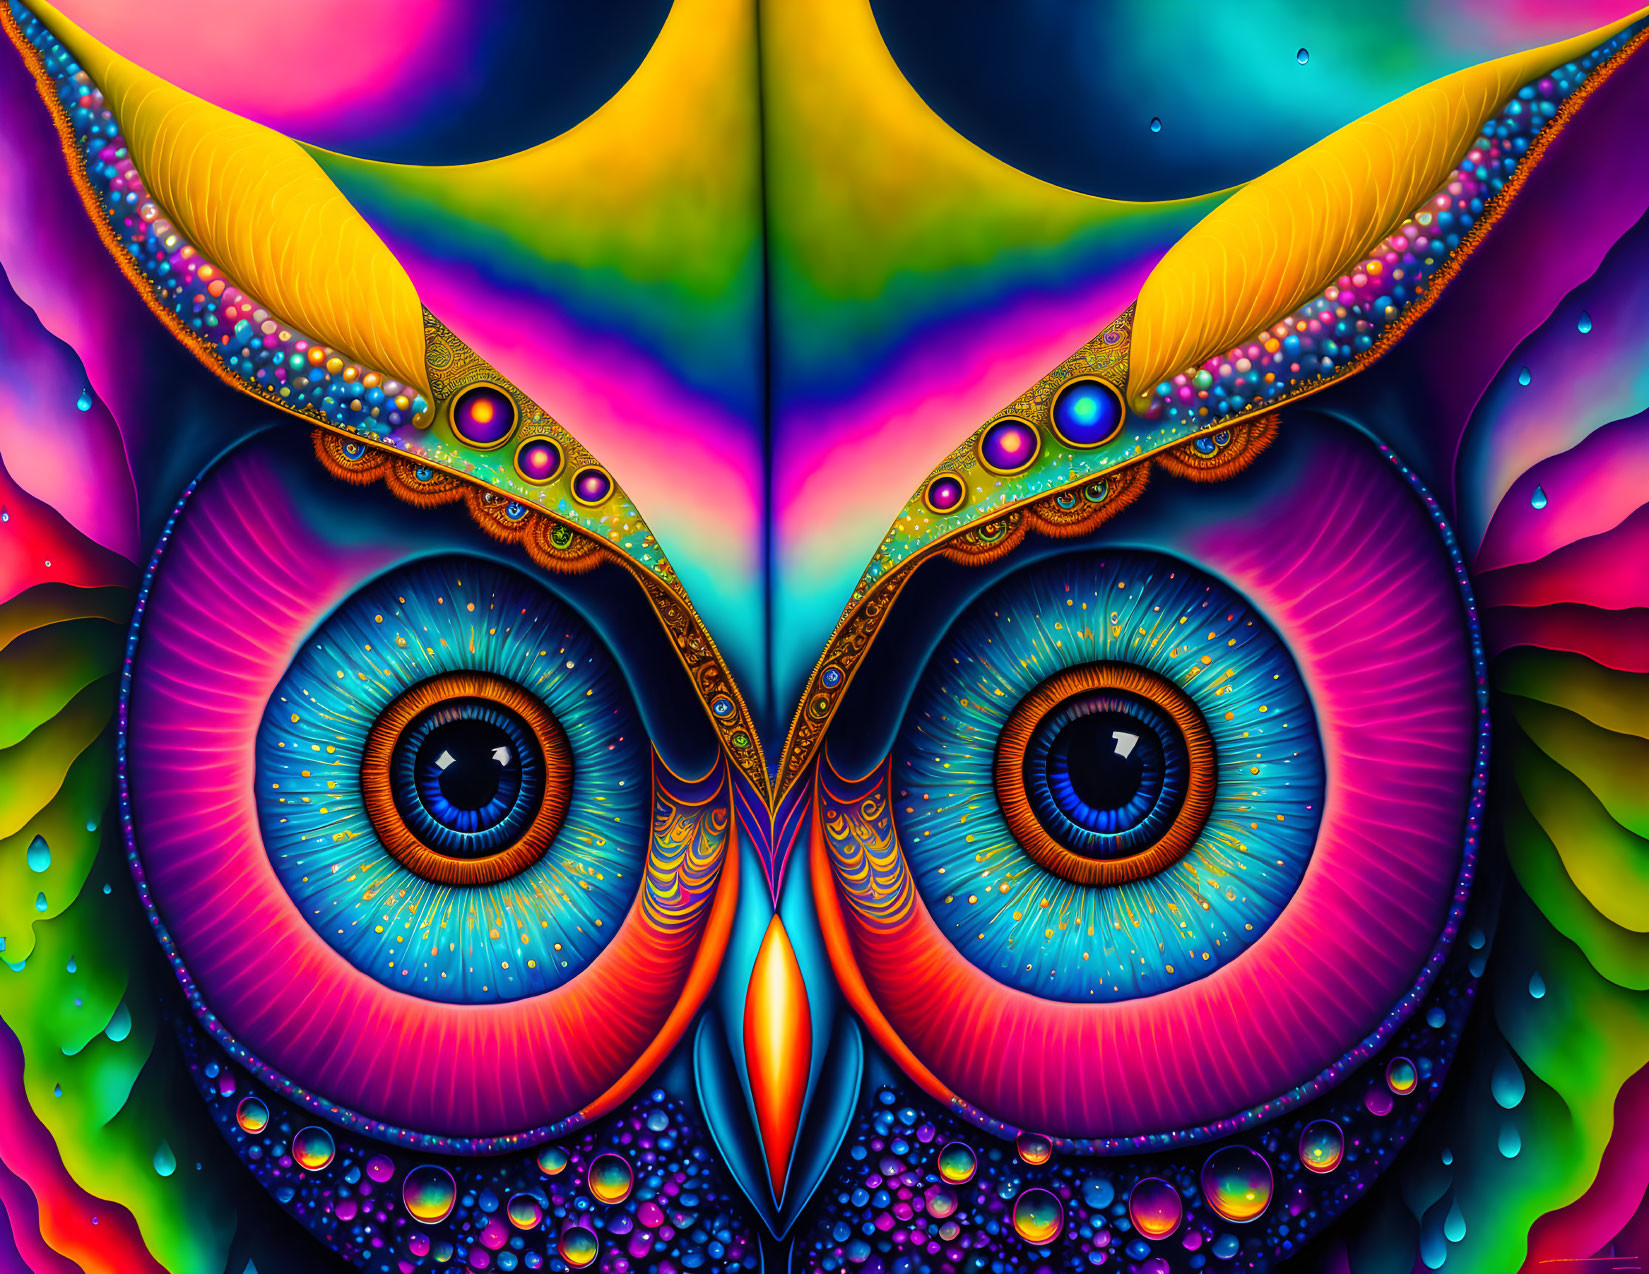 Colorful Owl Art with Psychedelic Background